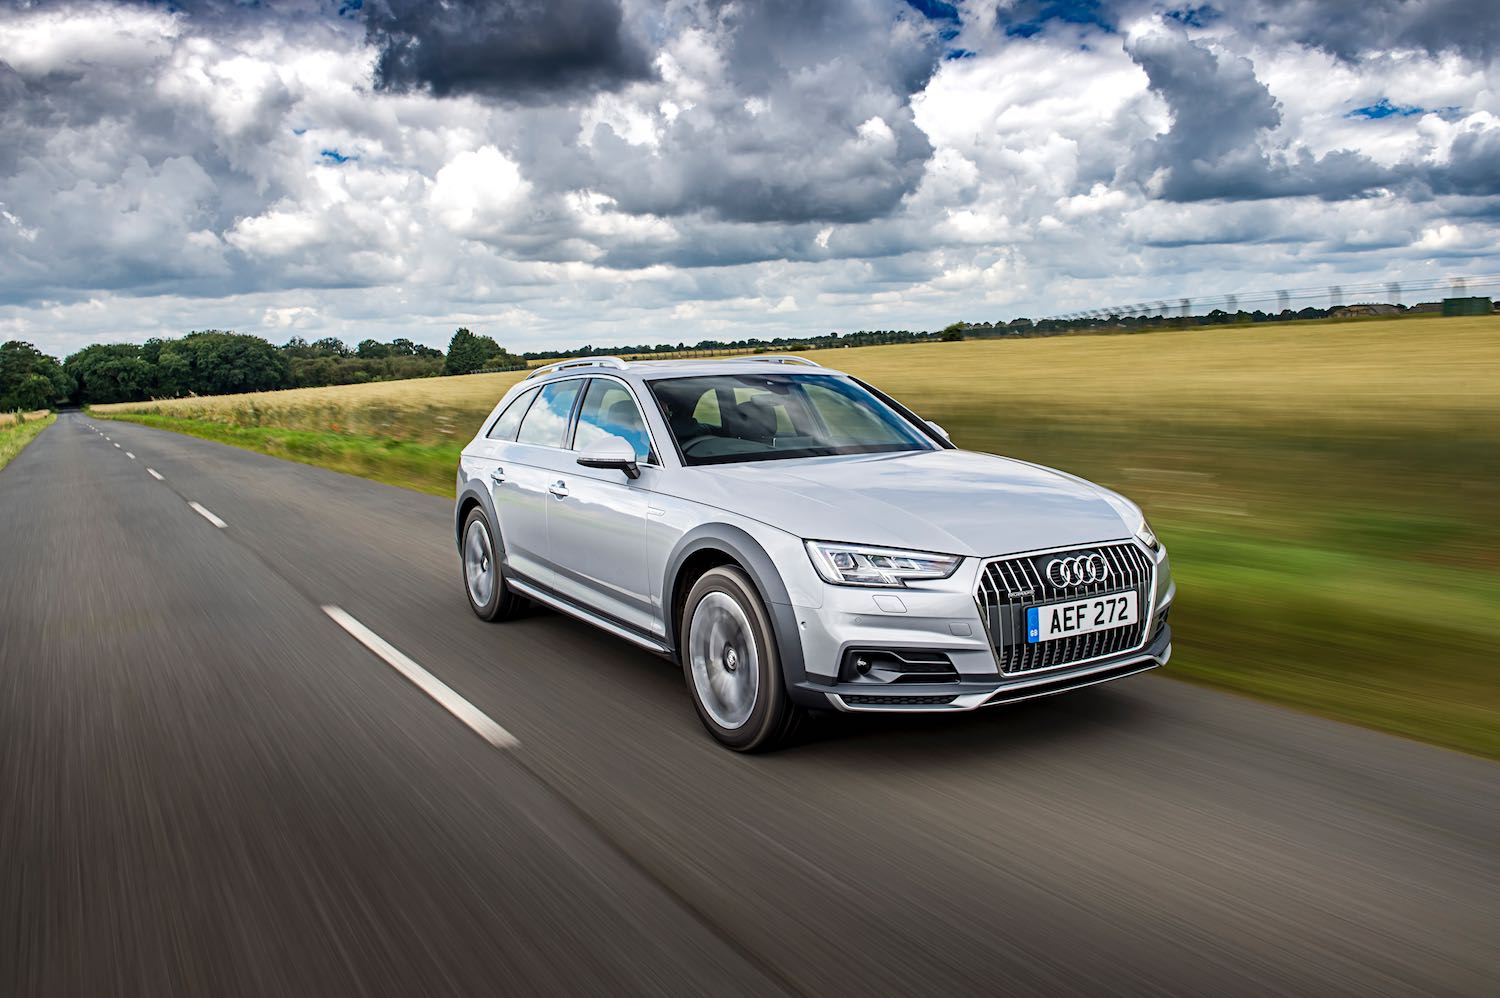 Neil Lyndon reviews the Audi Allroad for drive-5